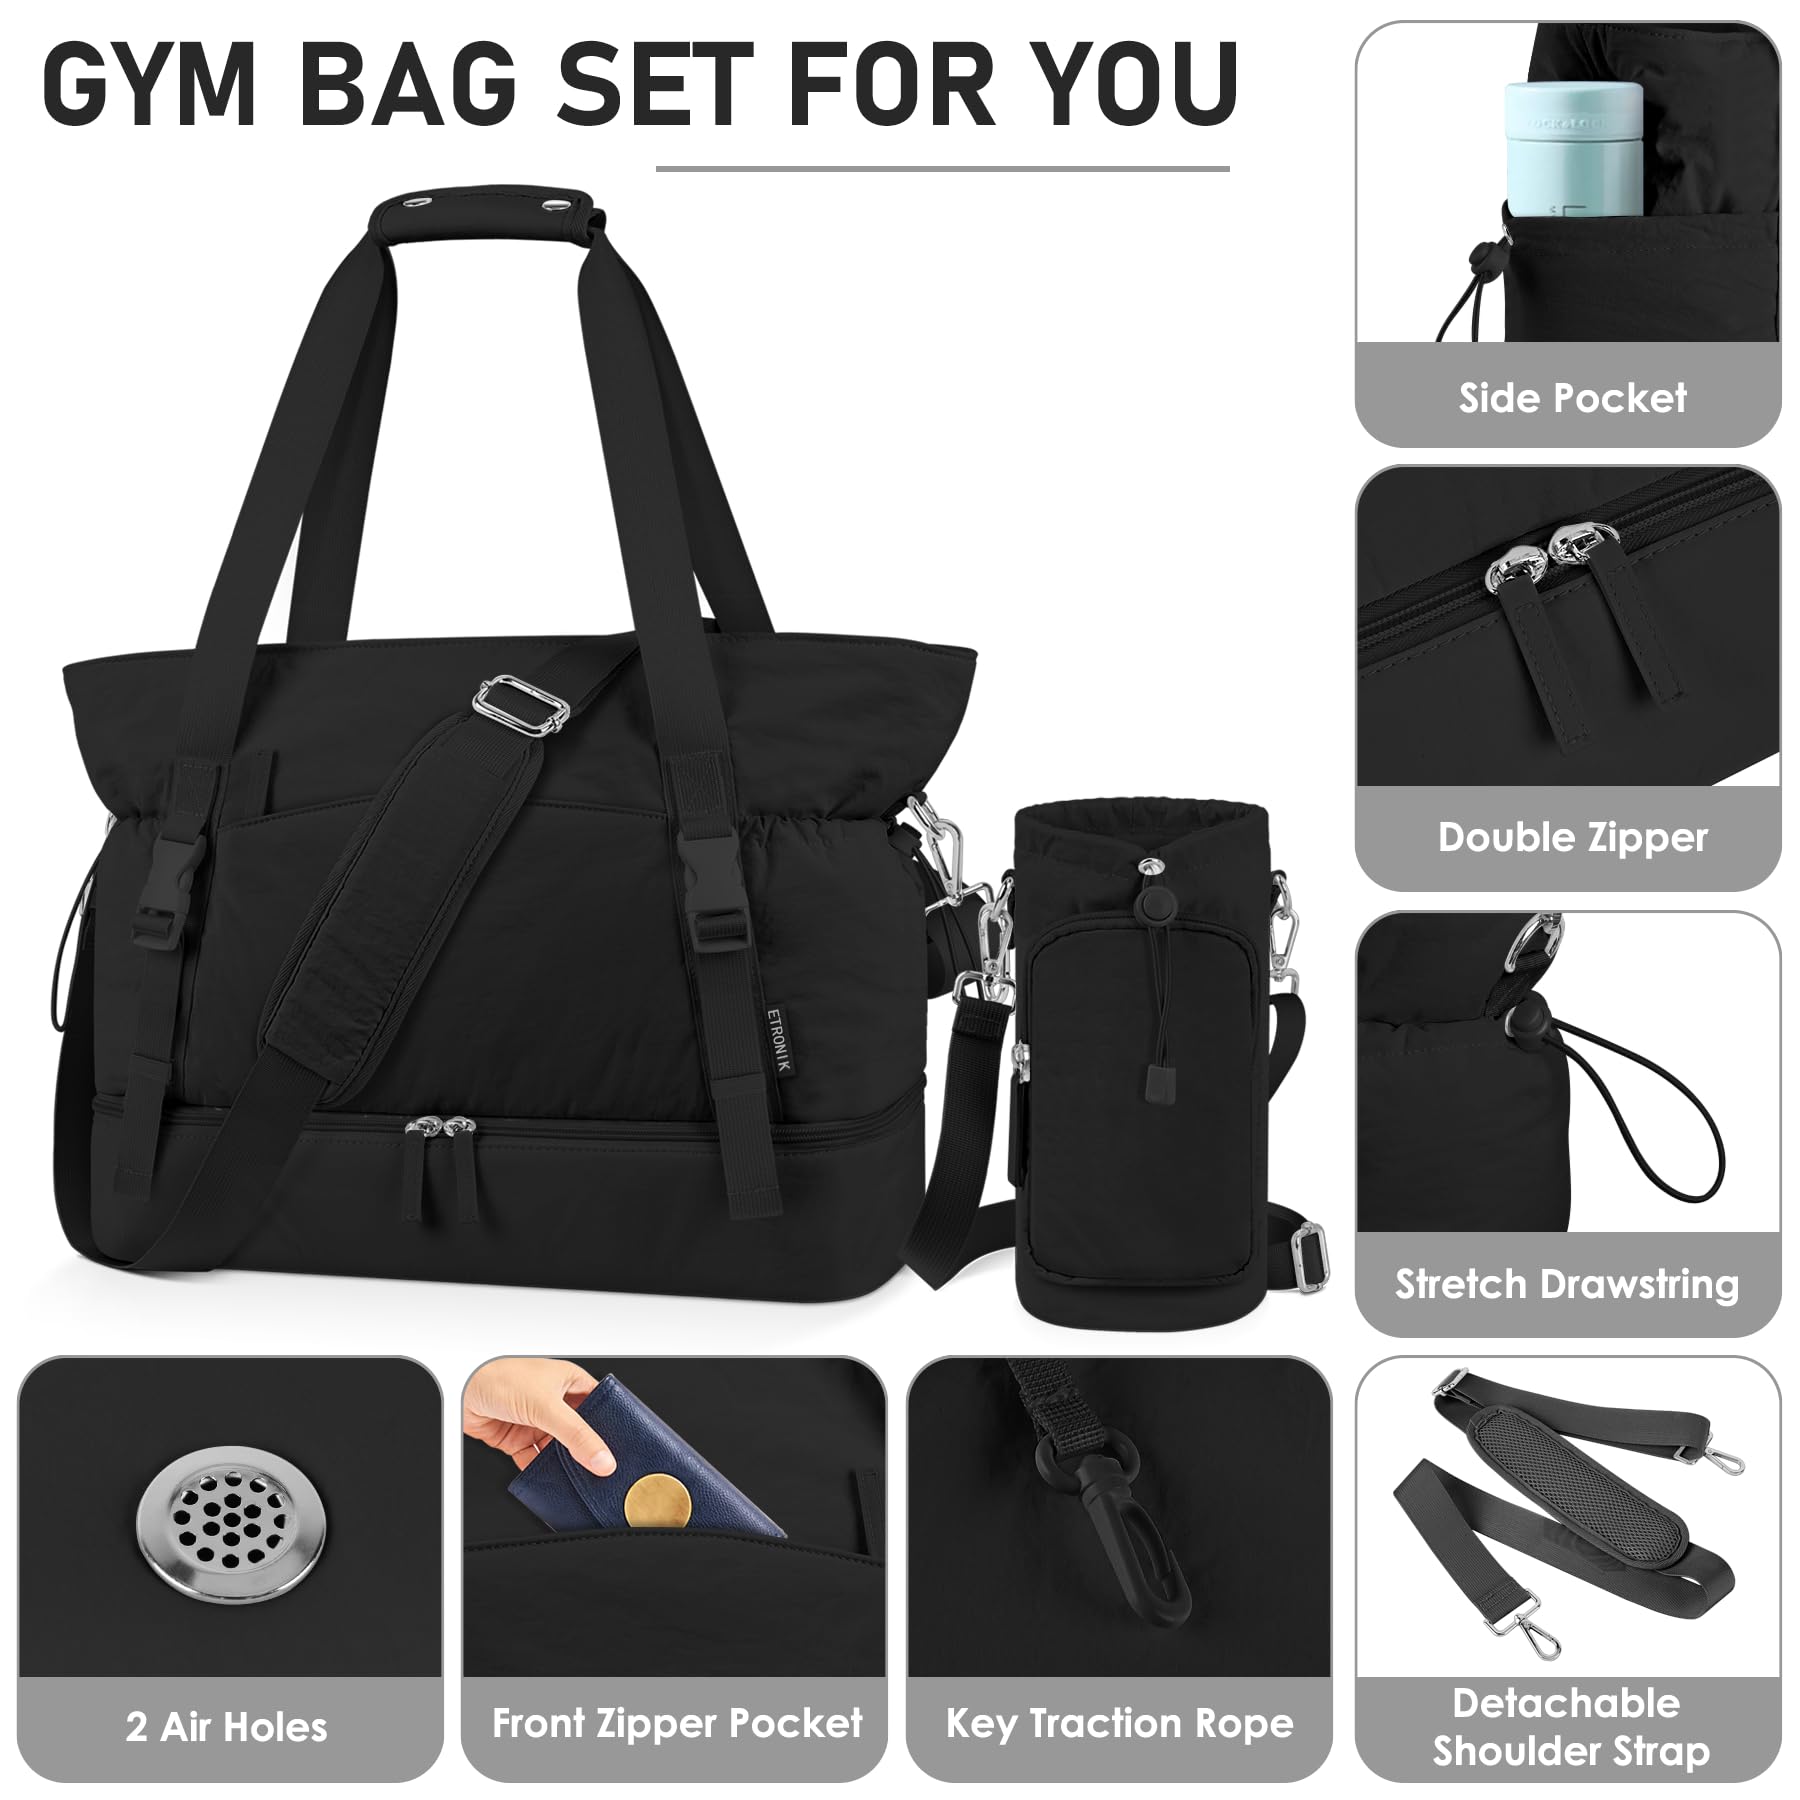 ETRONIK Gym Bag for Women, Tote Bag, Travel Duffle Bag with Water Bottle Bag, 40L Yoga Mat Bag with Shoe Compartment & Wet Pocket,Travel Bag for Work, Hospital, Travel, Study, Pilates and Gym, Black